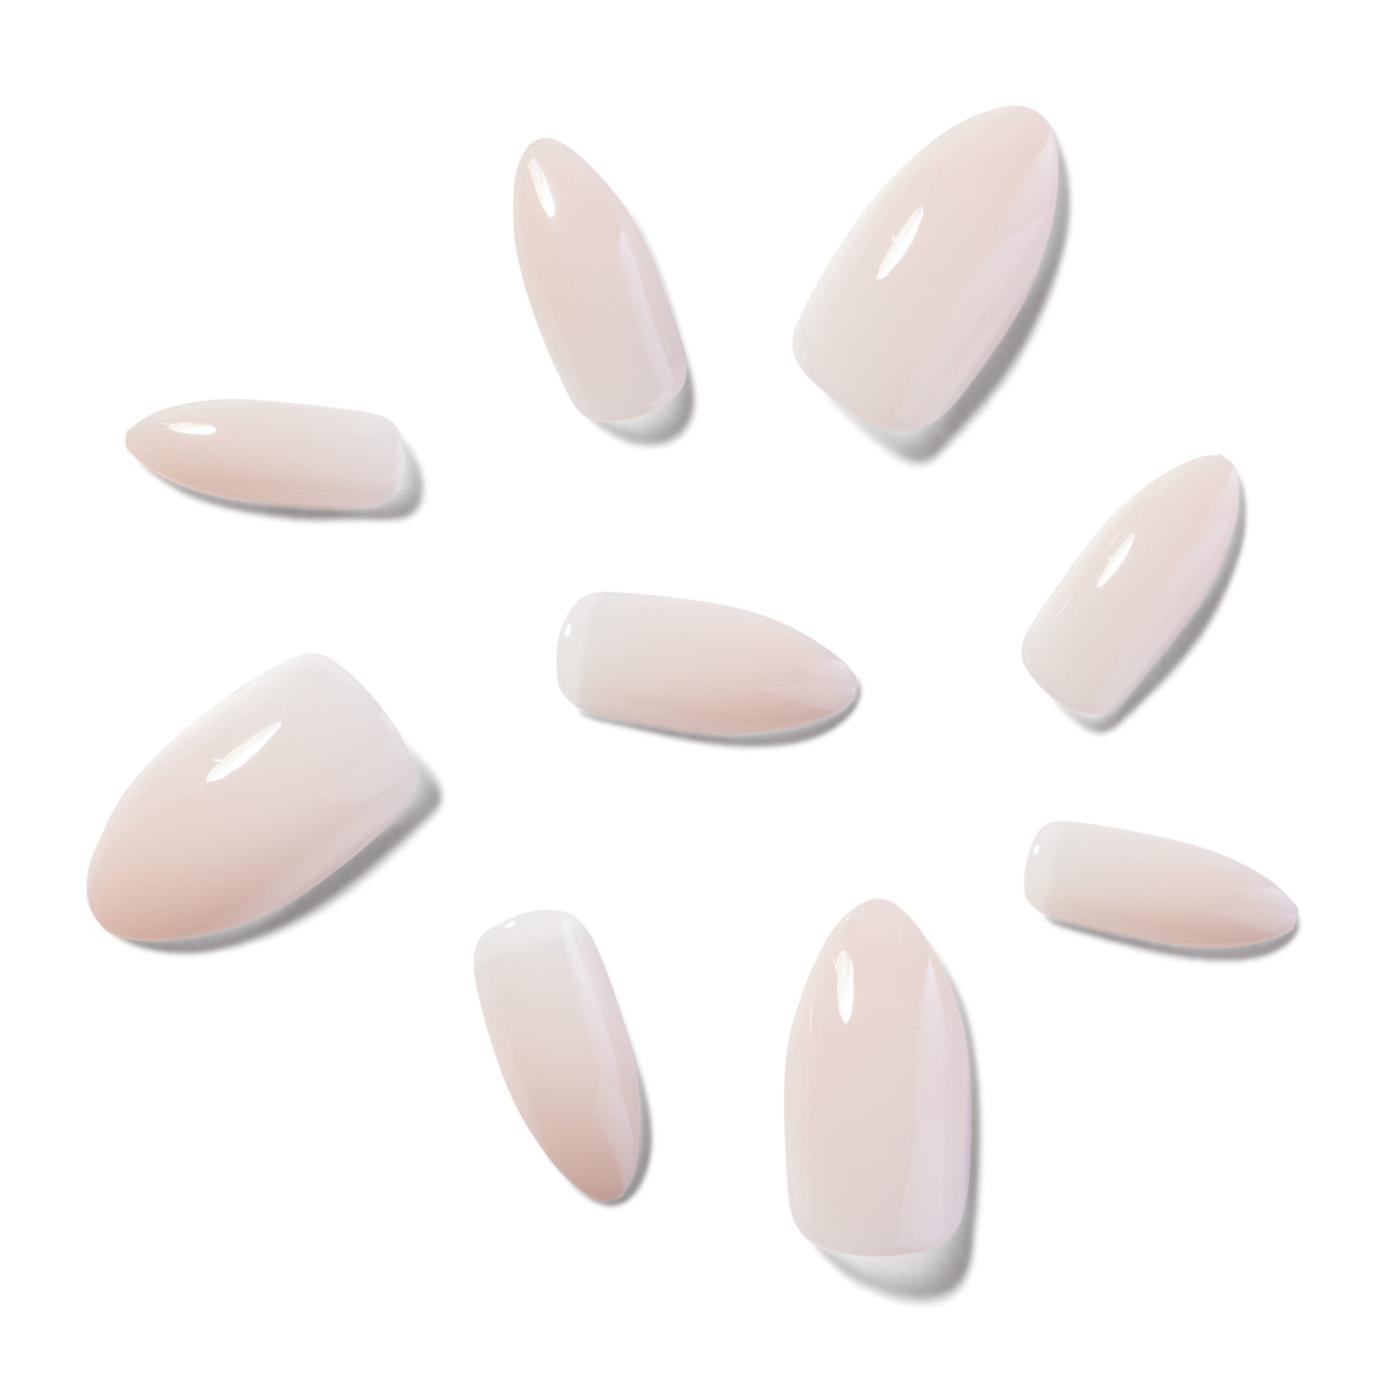 Diosa Medium Almond Artificial Nails – Truly Hue Shell; image 4 of 7